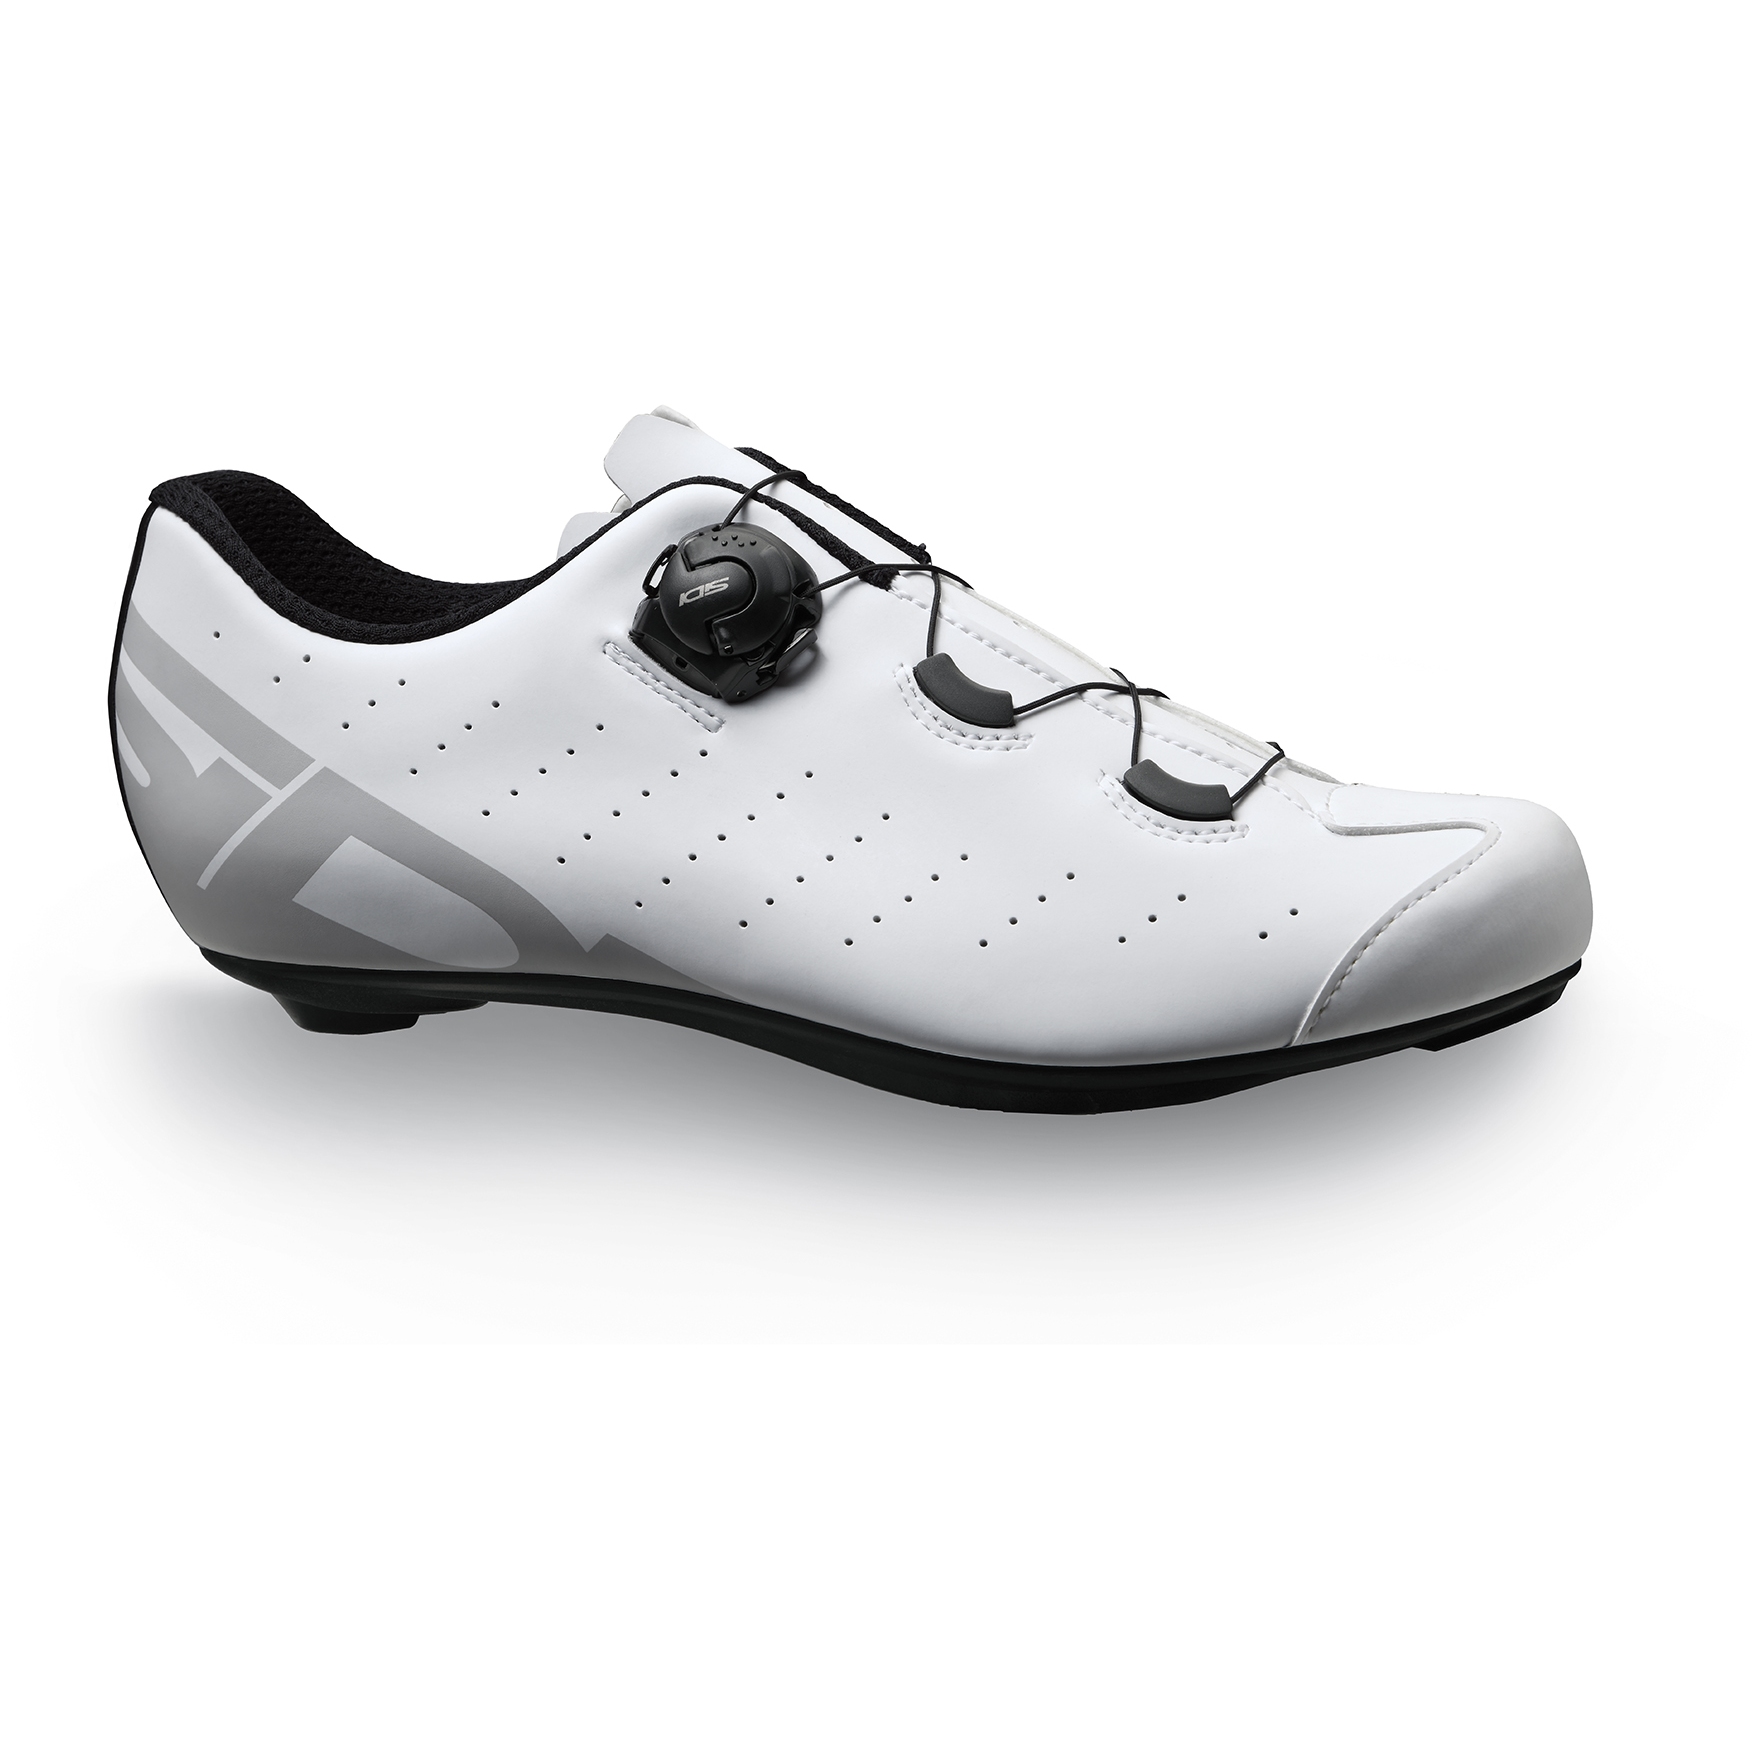 Picture of Sidi Fast 2 Road Shoes - White/Grey